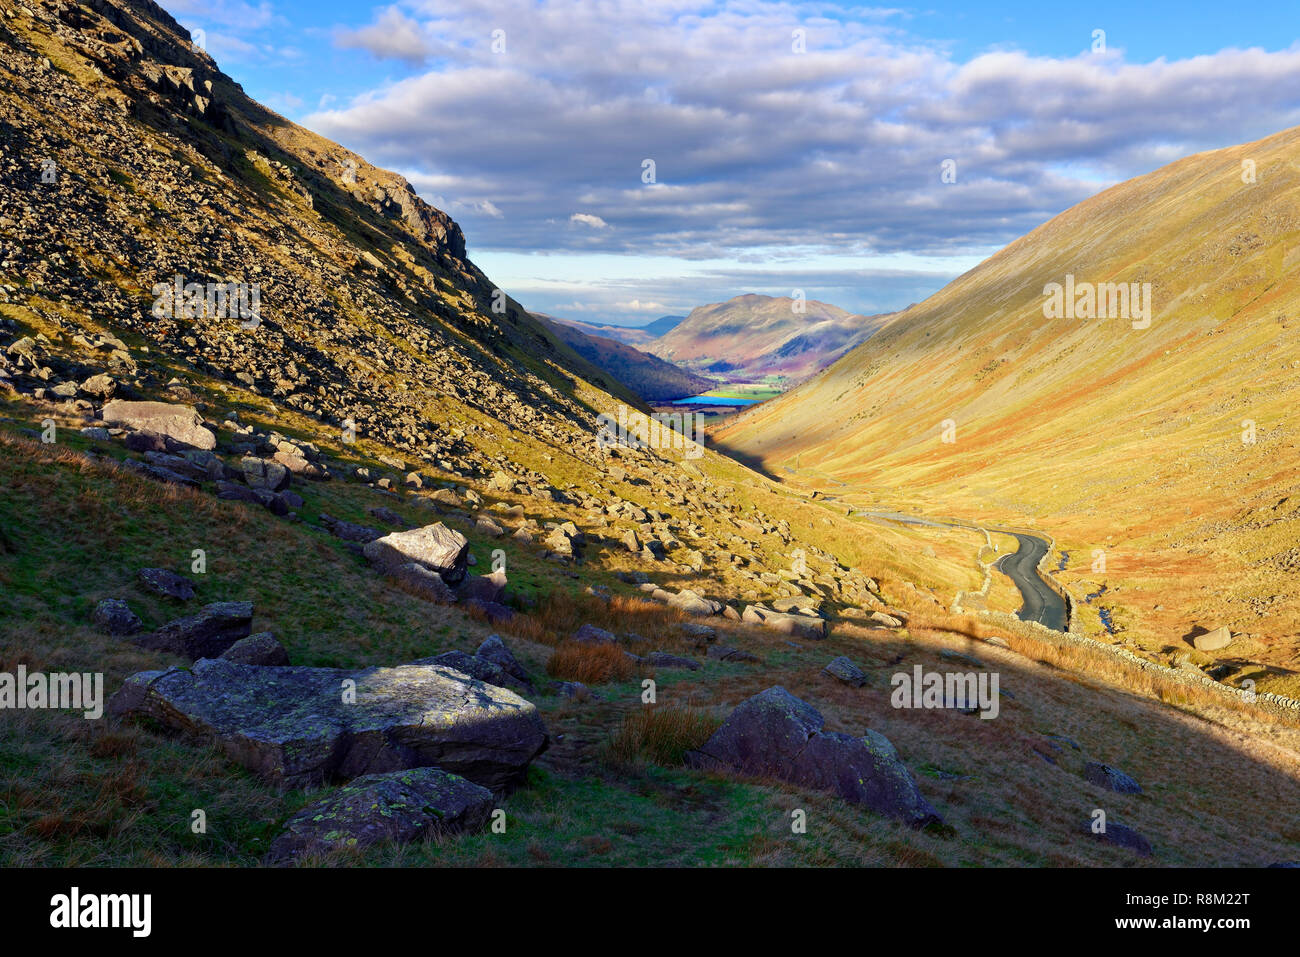 An elevated view of the Kirkstone Pass in the English Lake District with Brothers Water in the distance. Stock Photo